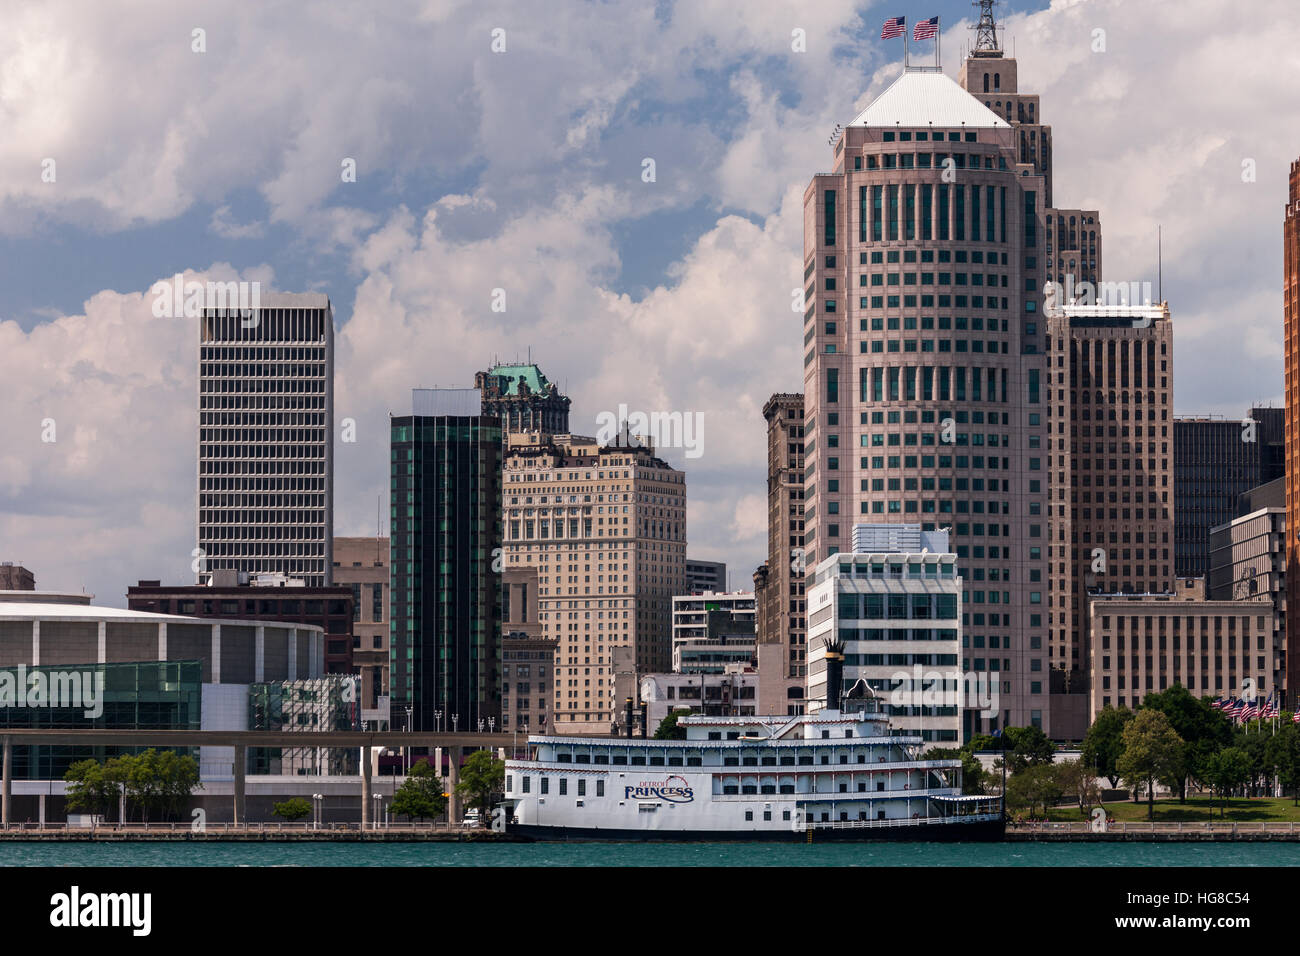 The Detroit River and city skyline as seen from Windsor, Ontario, Canada. Stock Photo